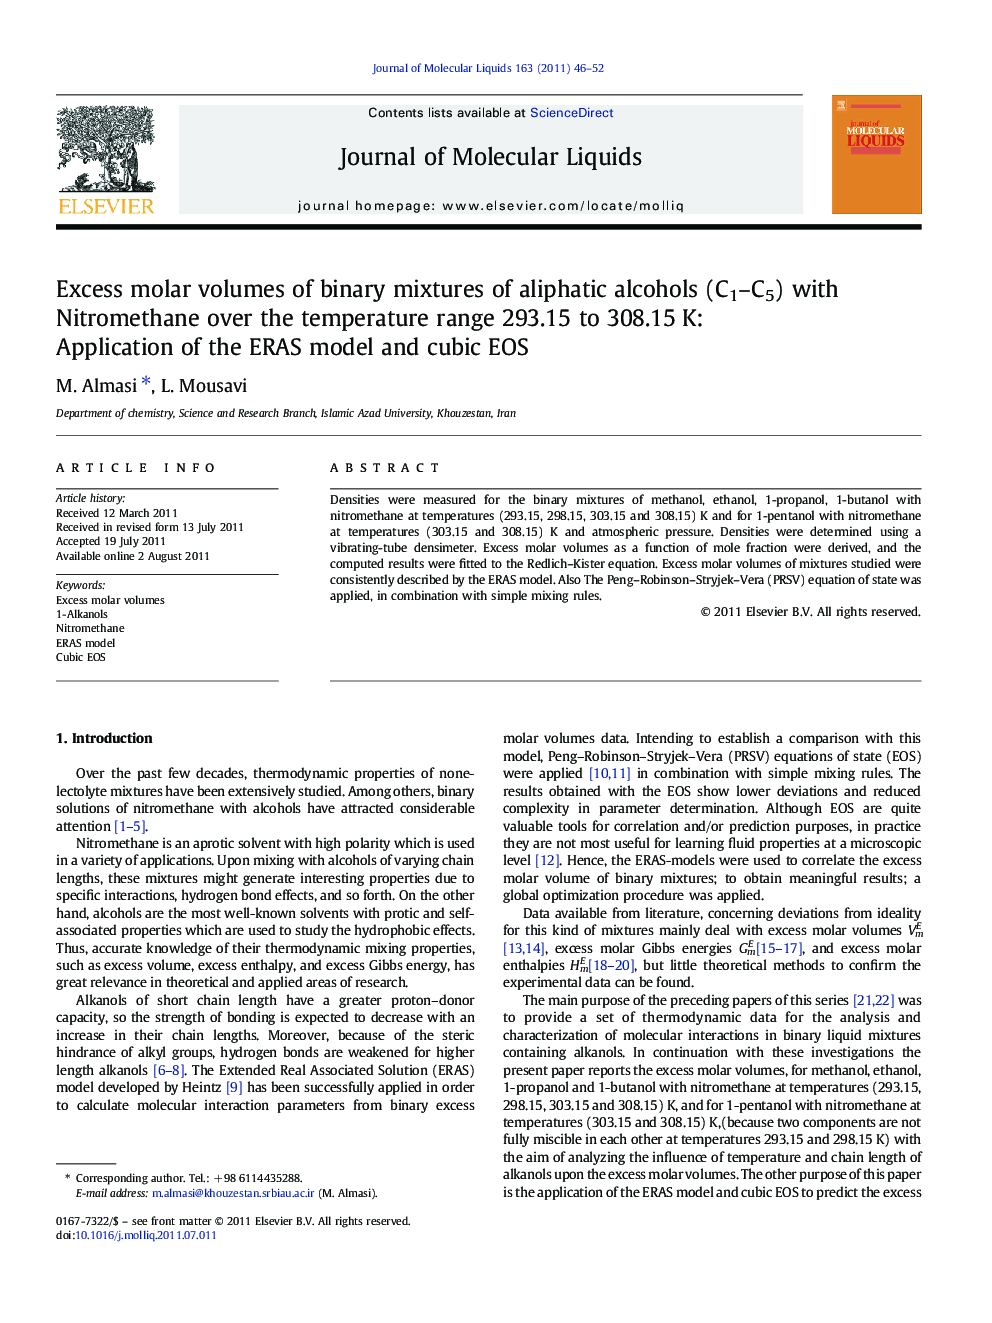 Excess molar volumes of binary mixtures of aliphatic alcohols (C1-C5) with Nitromethane over the temperature range 293.15 to 308.15Â K: Application of the ERAS model and cubic EOS